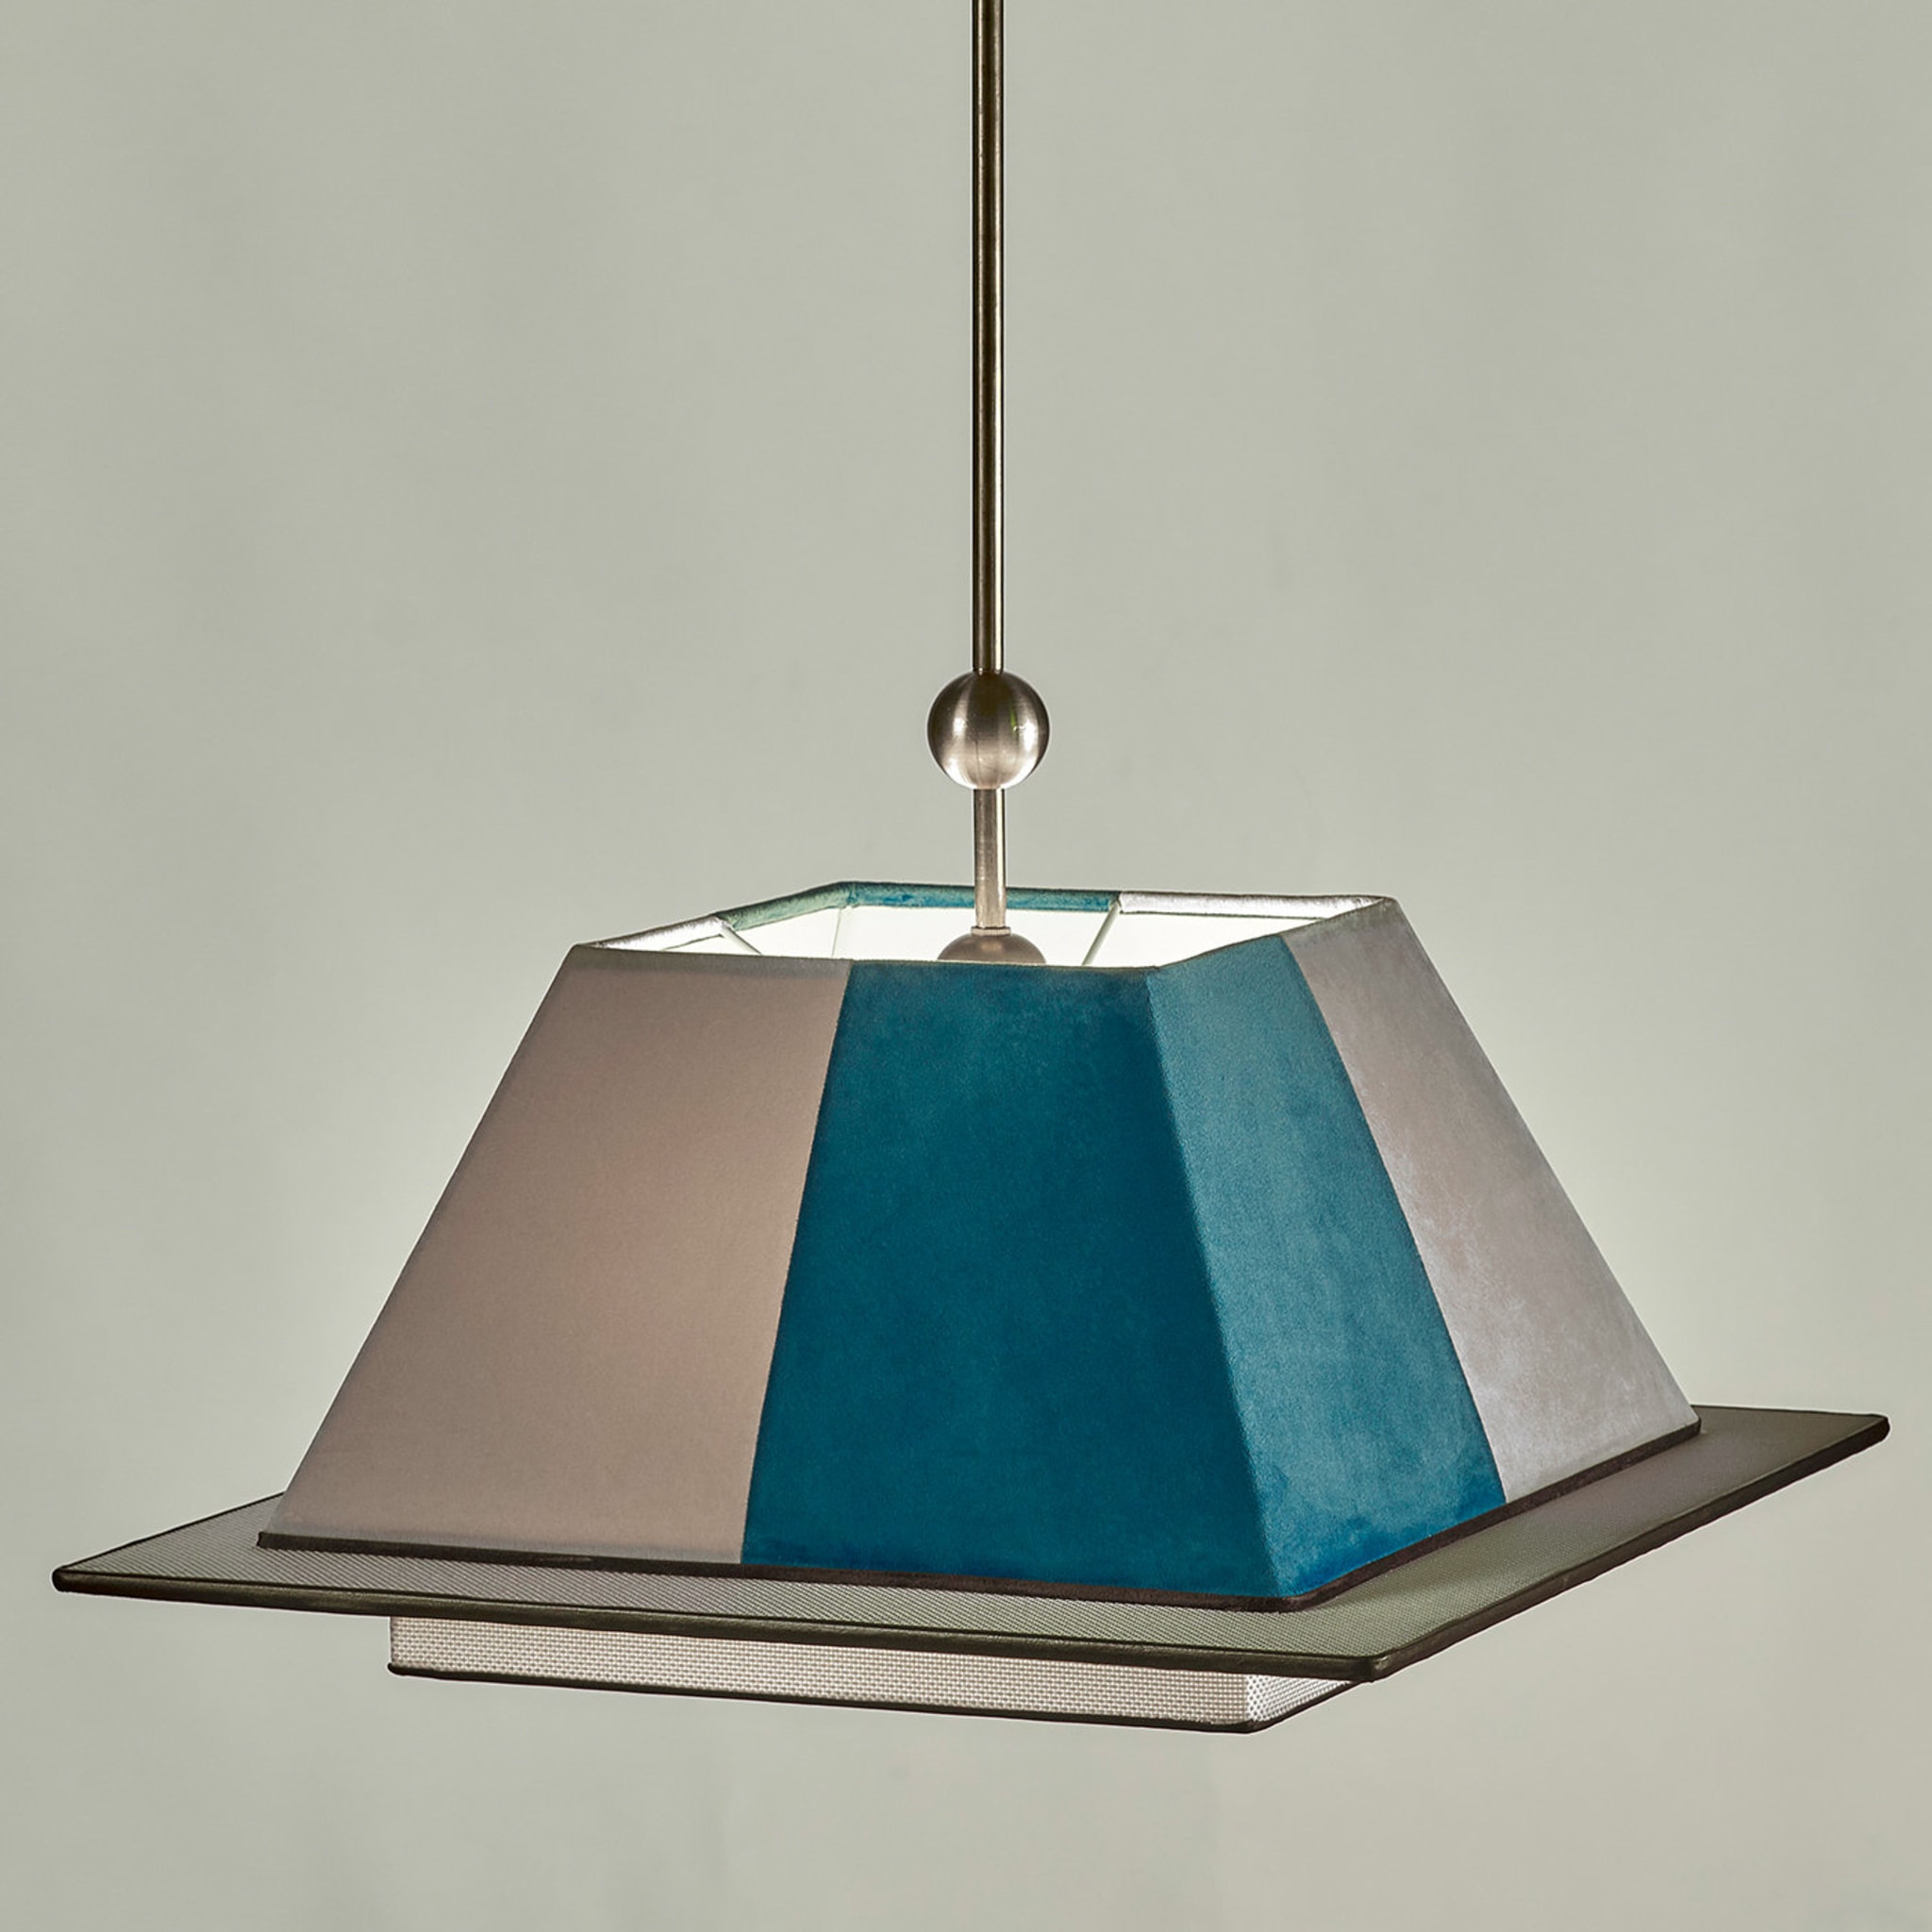 Il Tocco Ice Blue and Sand Pendant Light - Alternative view 1